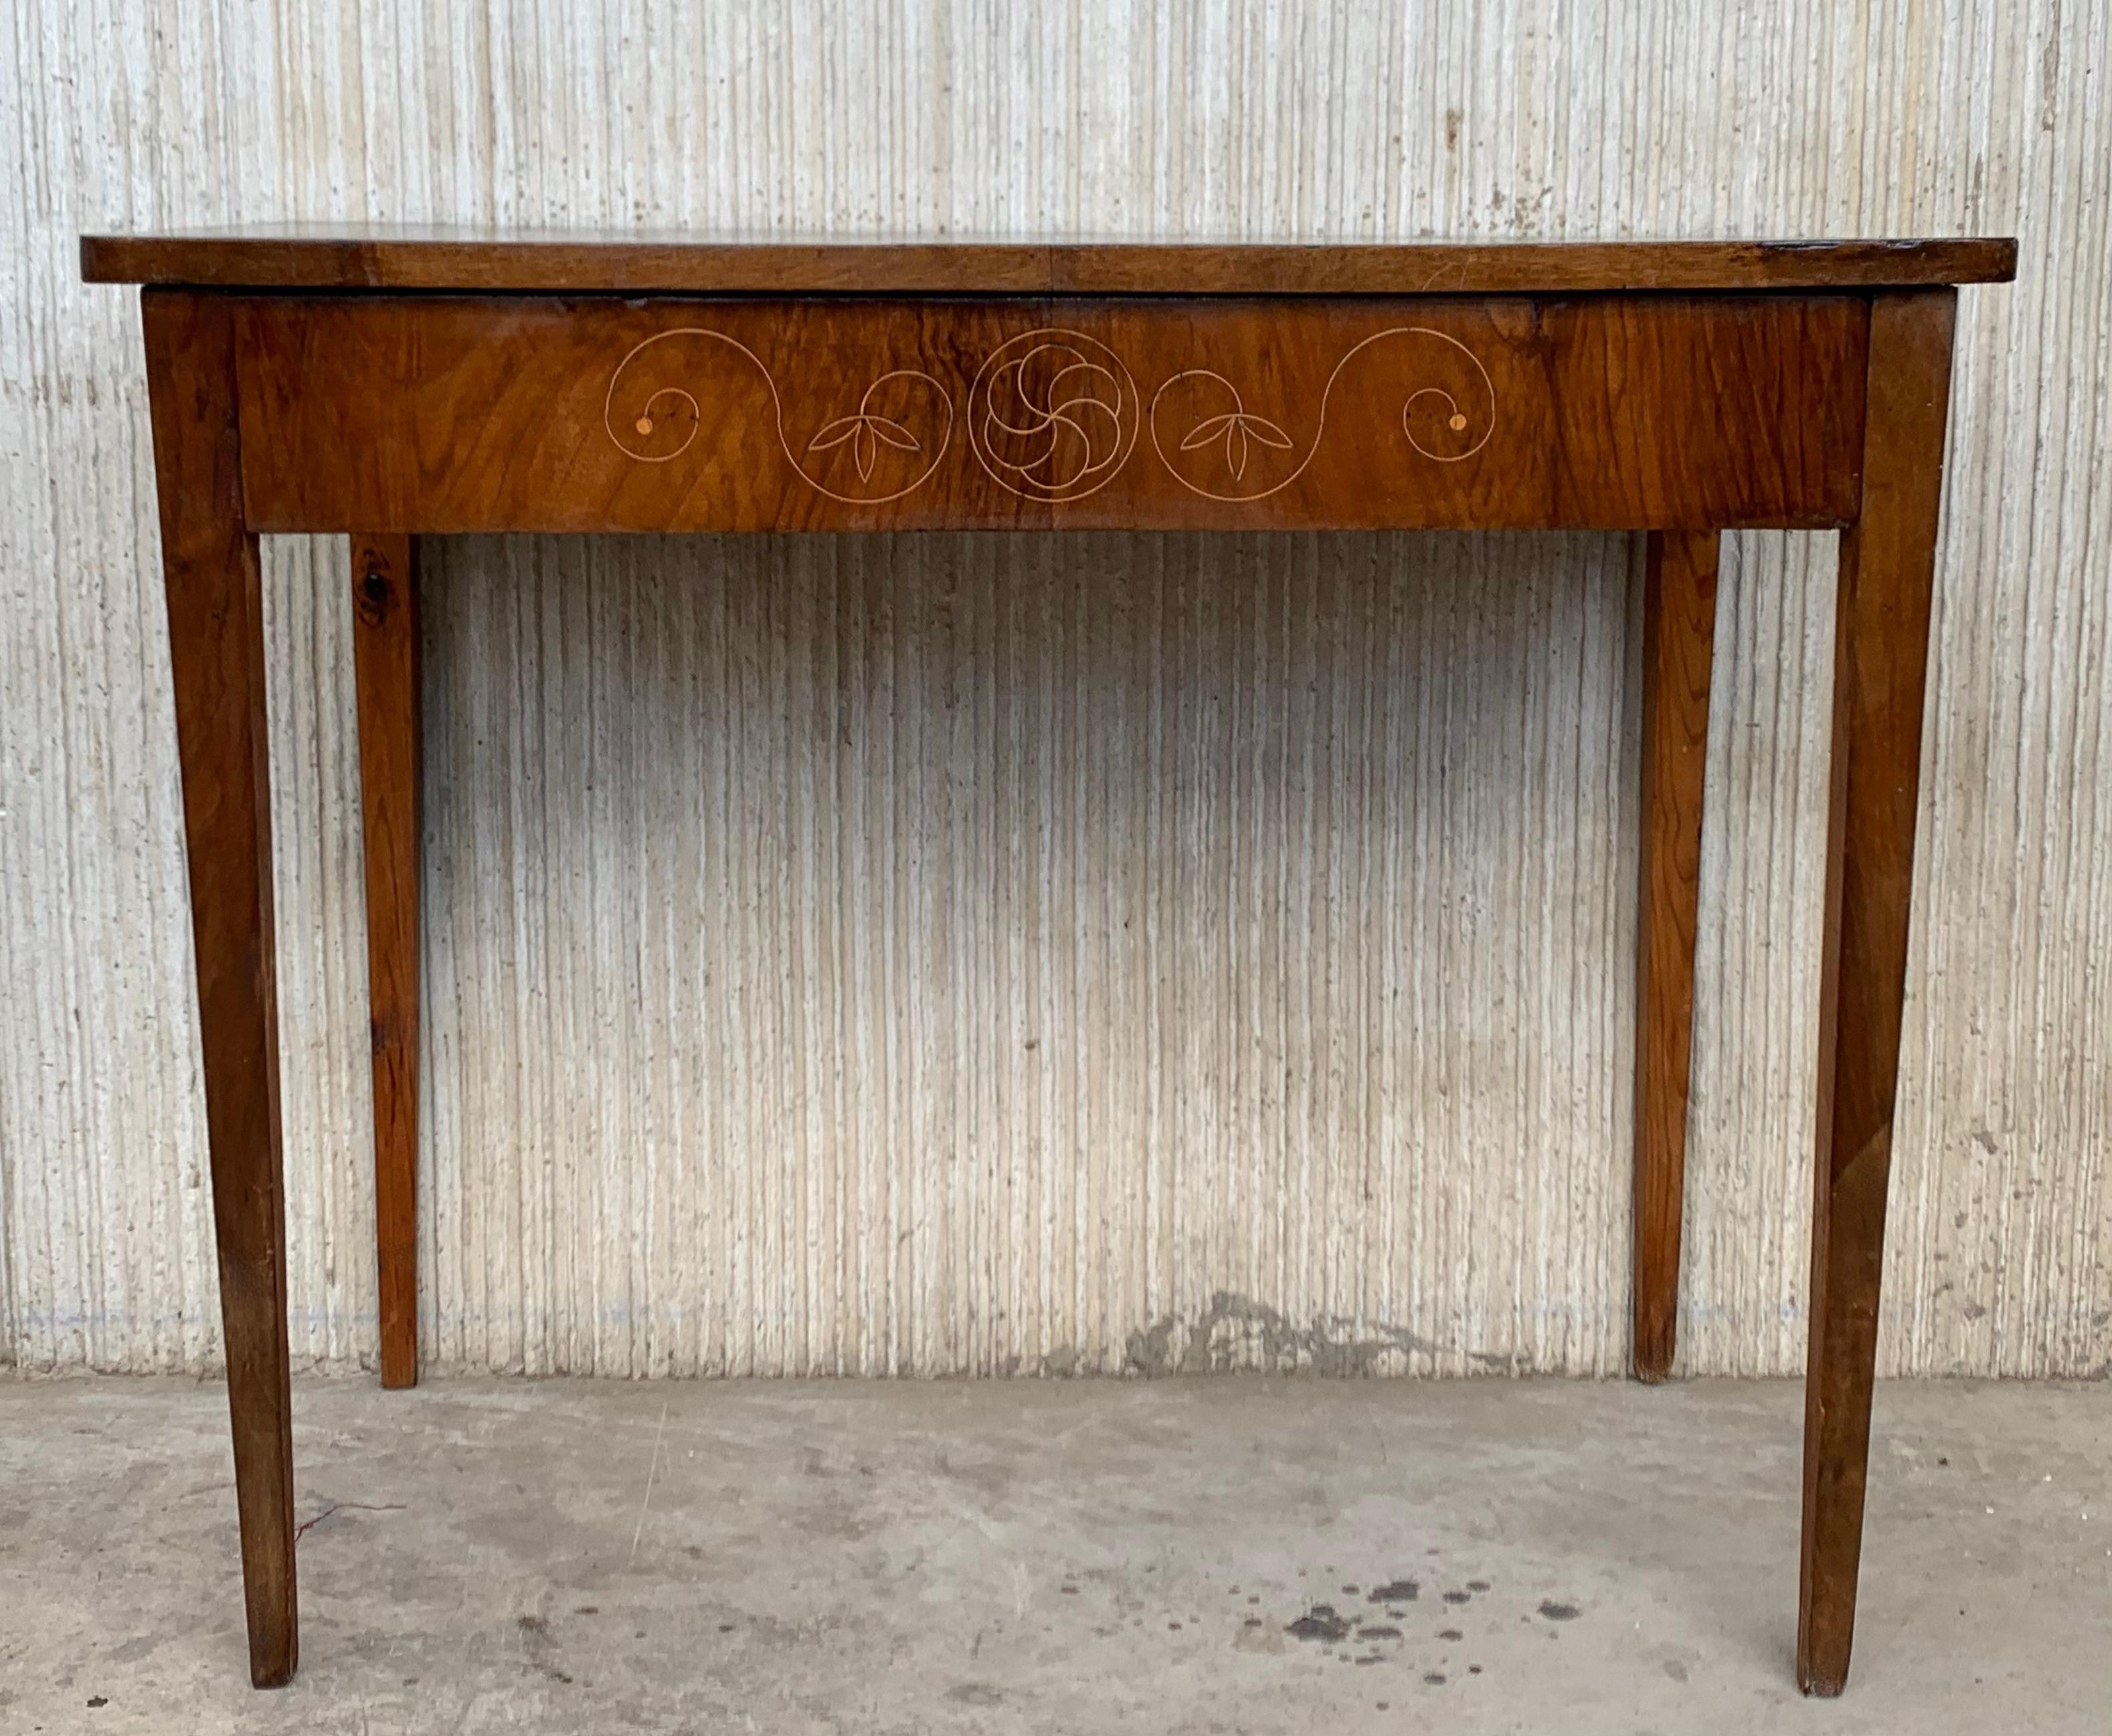 Early 20th century console in wood veneer. It features beautiful marquetry of rinceaux and floral motifs in drawer. It is resting on four tapered legs.